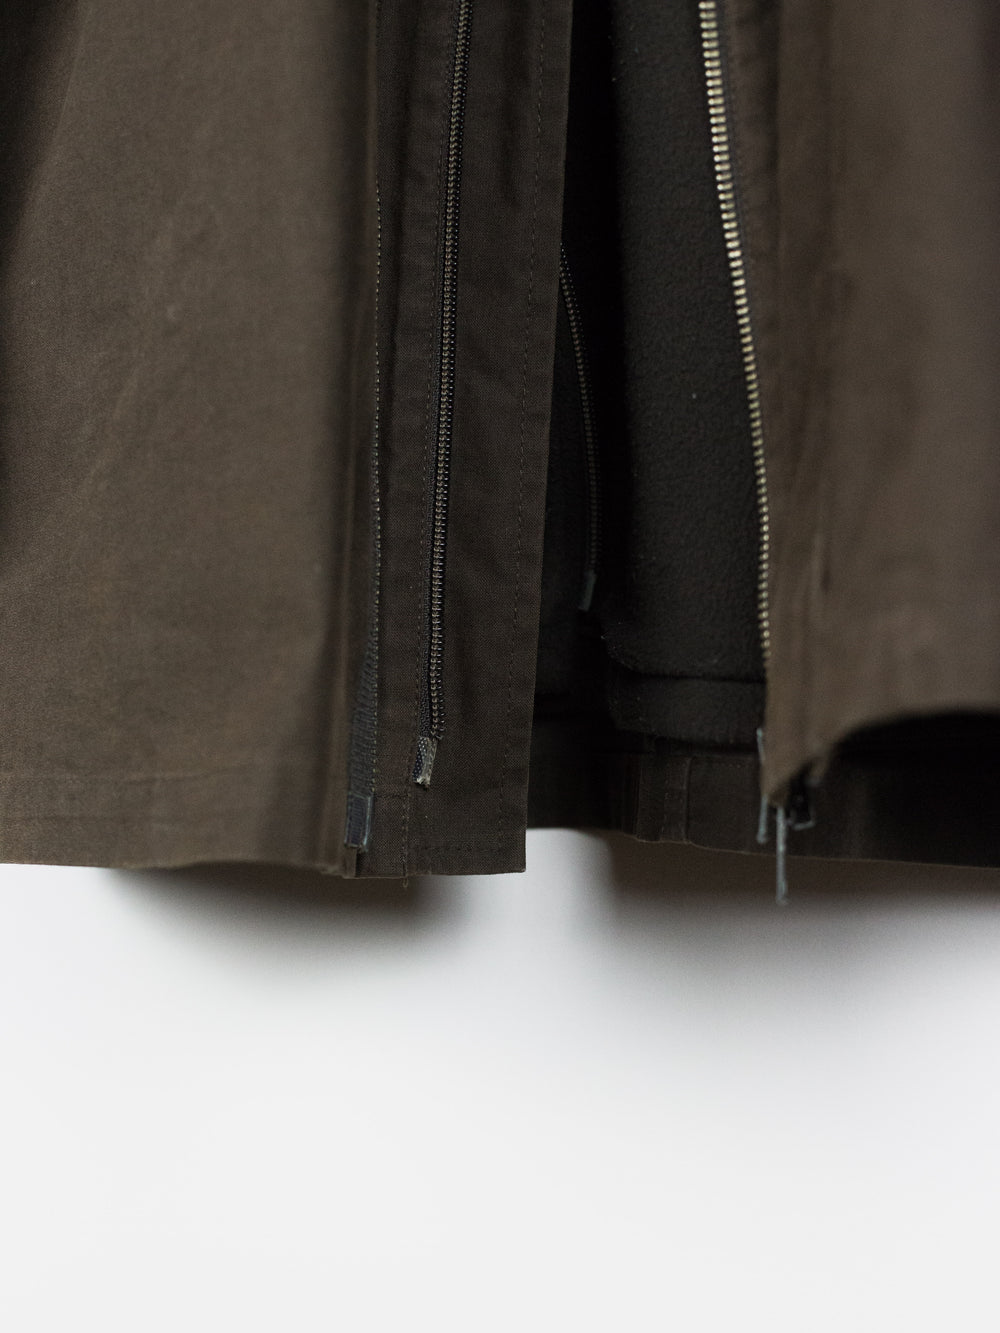 Helmut Lang AW98 Military Parka w/ Removable Fleece Lining